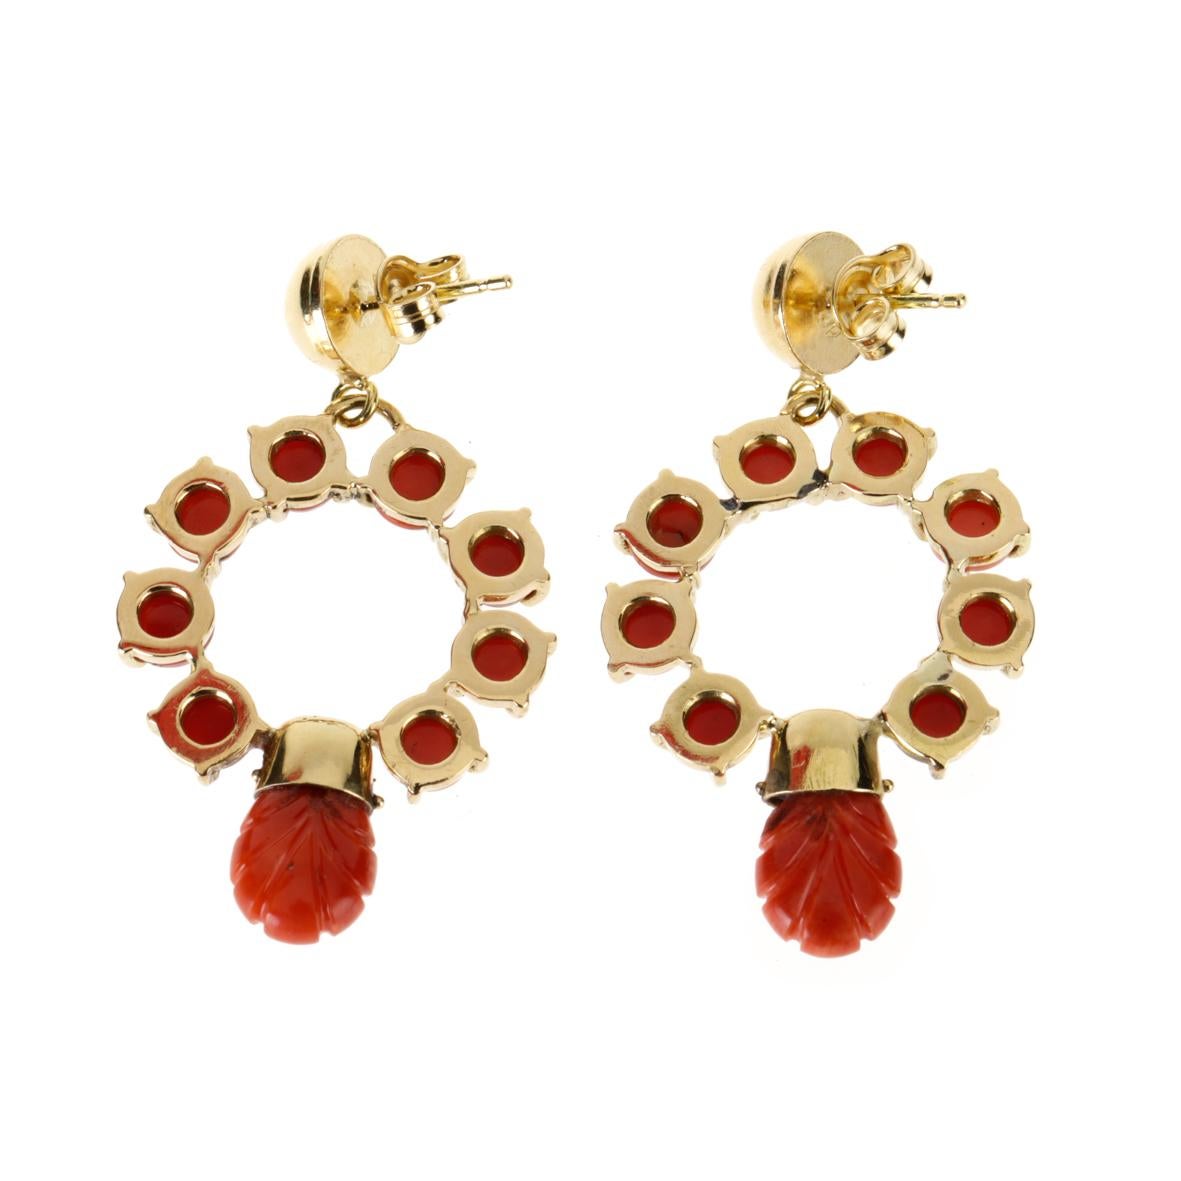 Red Italian  coral earrings 18 kt yellow gold gr. 9,20, little cabochon and a carved leaf.
Made in italy all hand craft made.
All Giulia Colussi jewelry is new and has never been previously owned or worn. Each item will arrive at your door